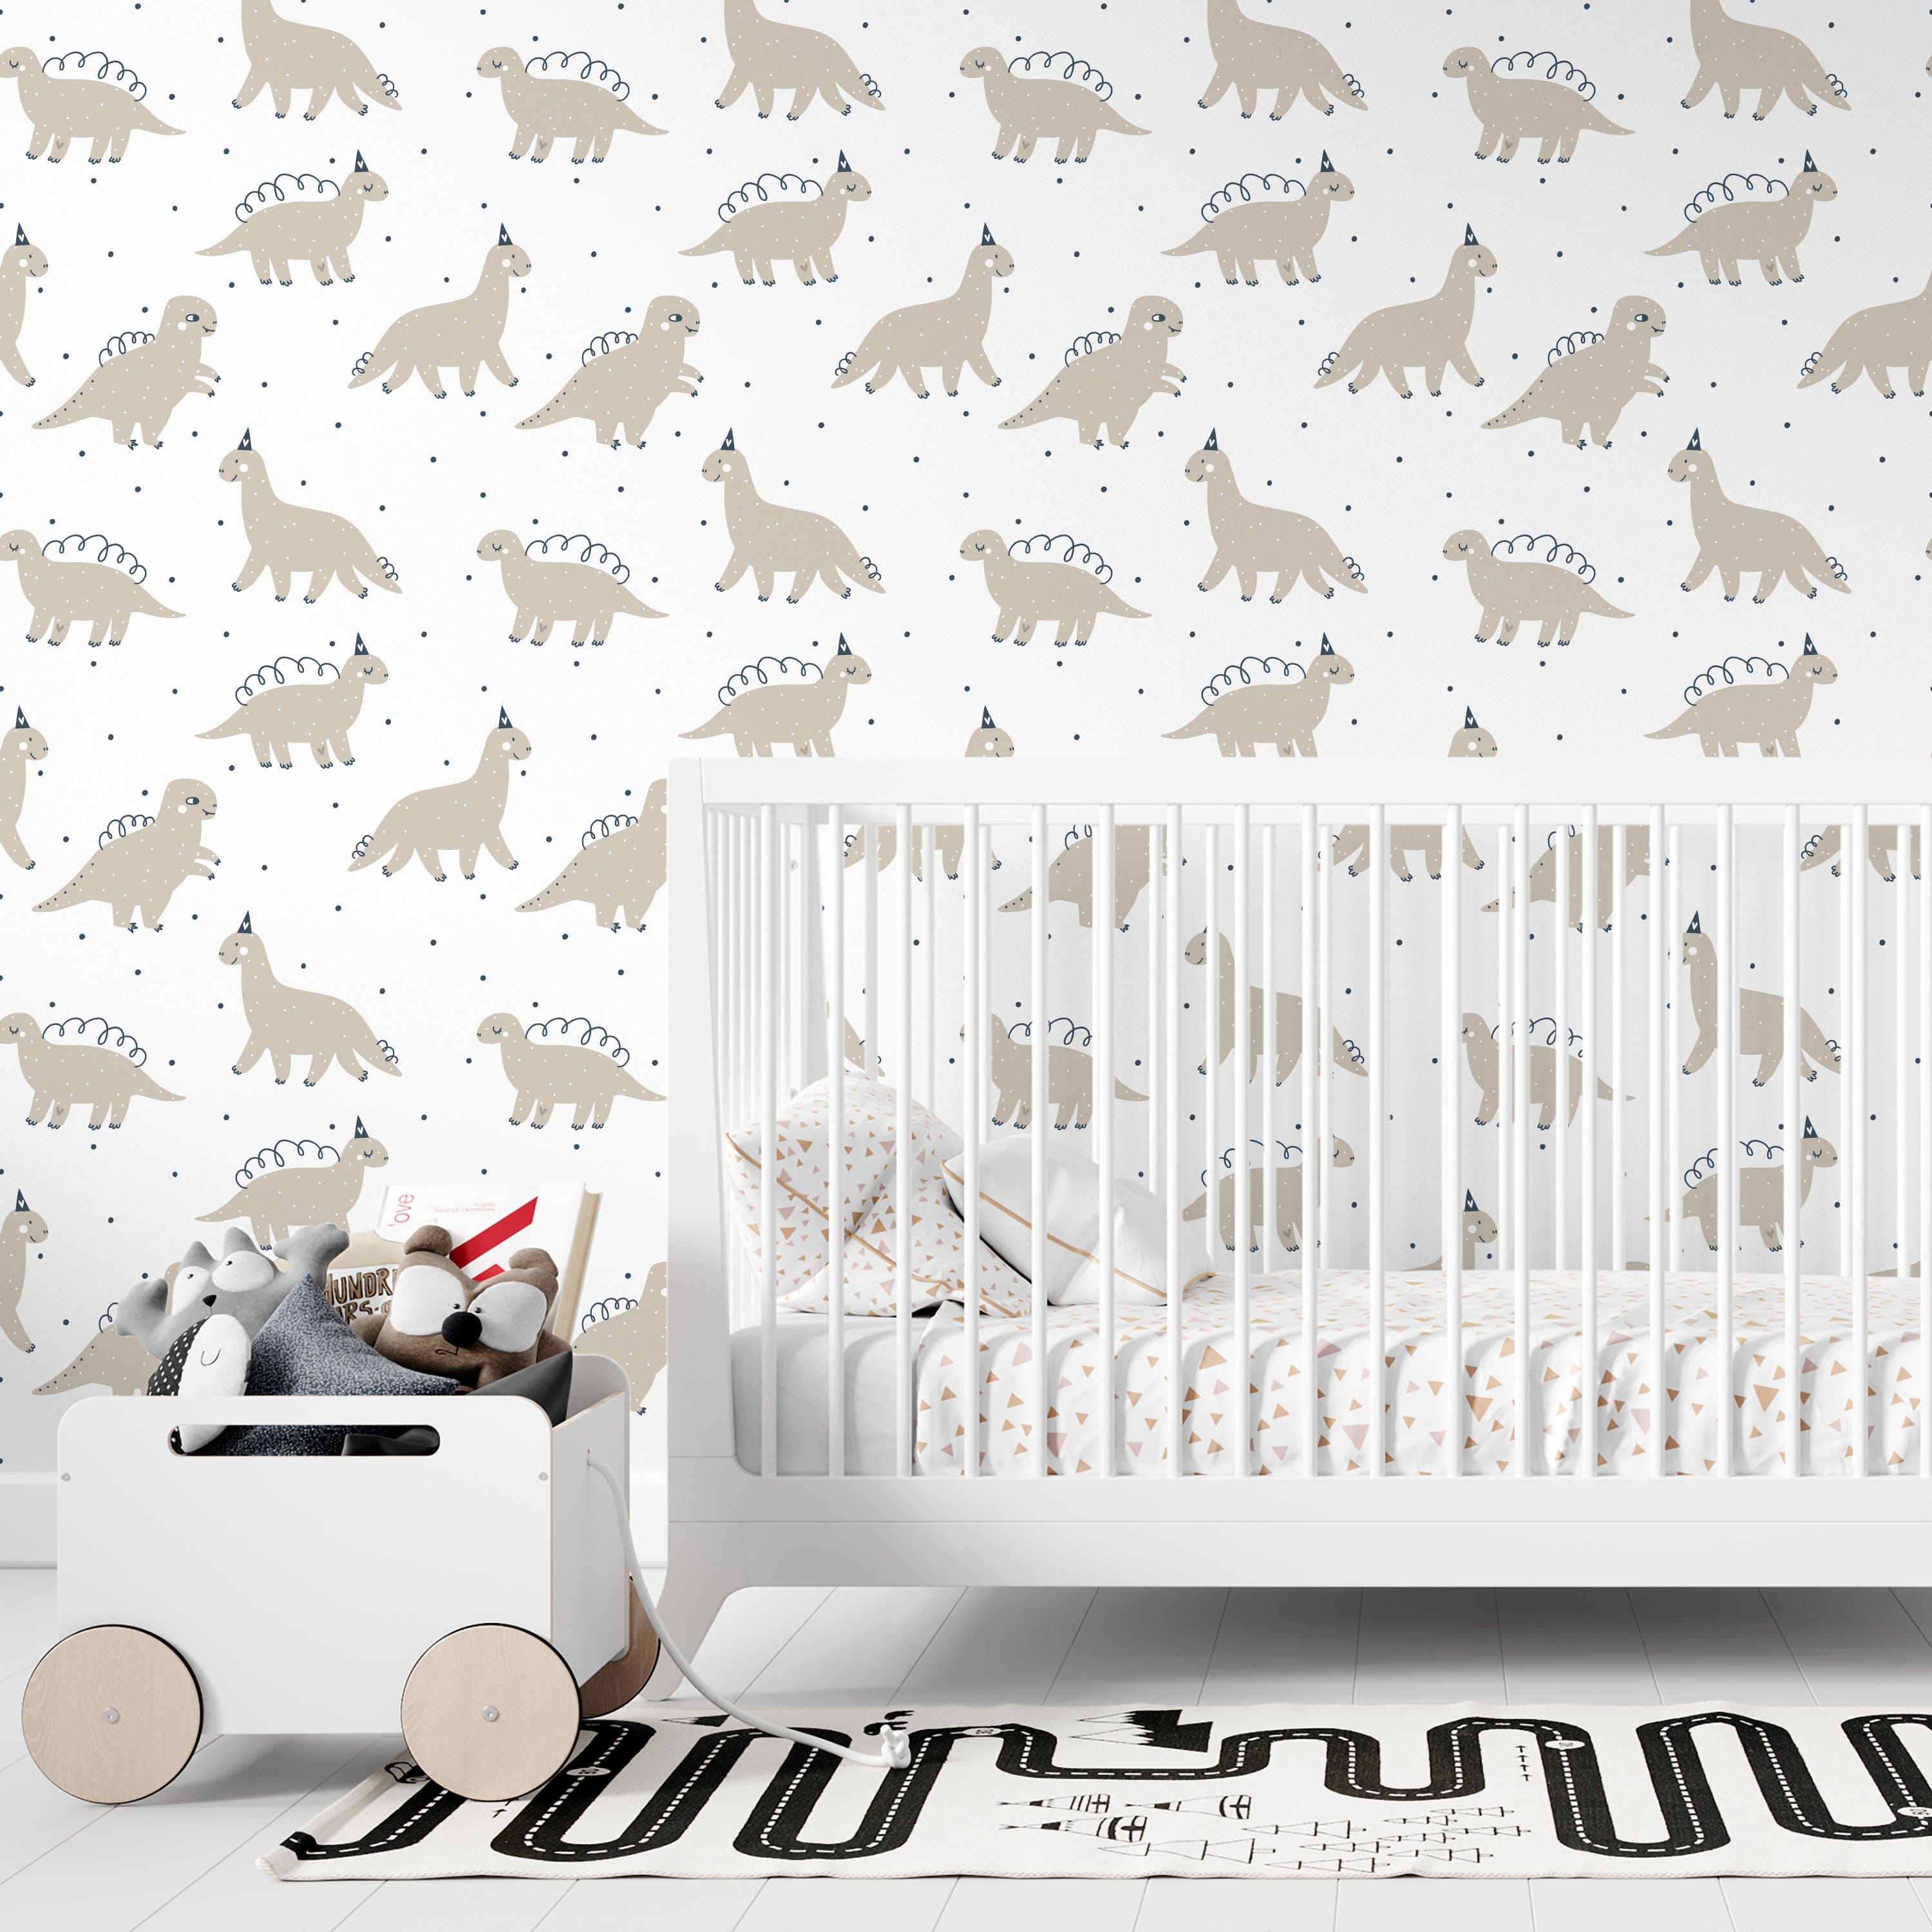 Dino Party Wallpaper installed in a children's nursery, featuring rows of friendly dinosaurs in party hats. The wallpaper complements a modern white crib and playful room accessories, creating a fun and inviting atmosphere for young children.